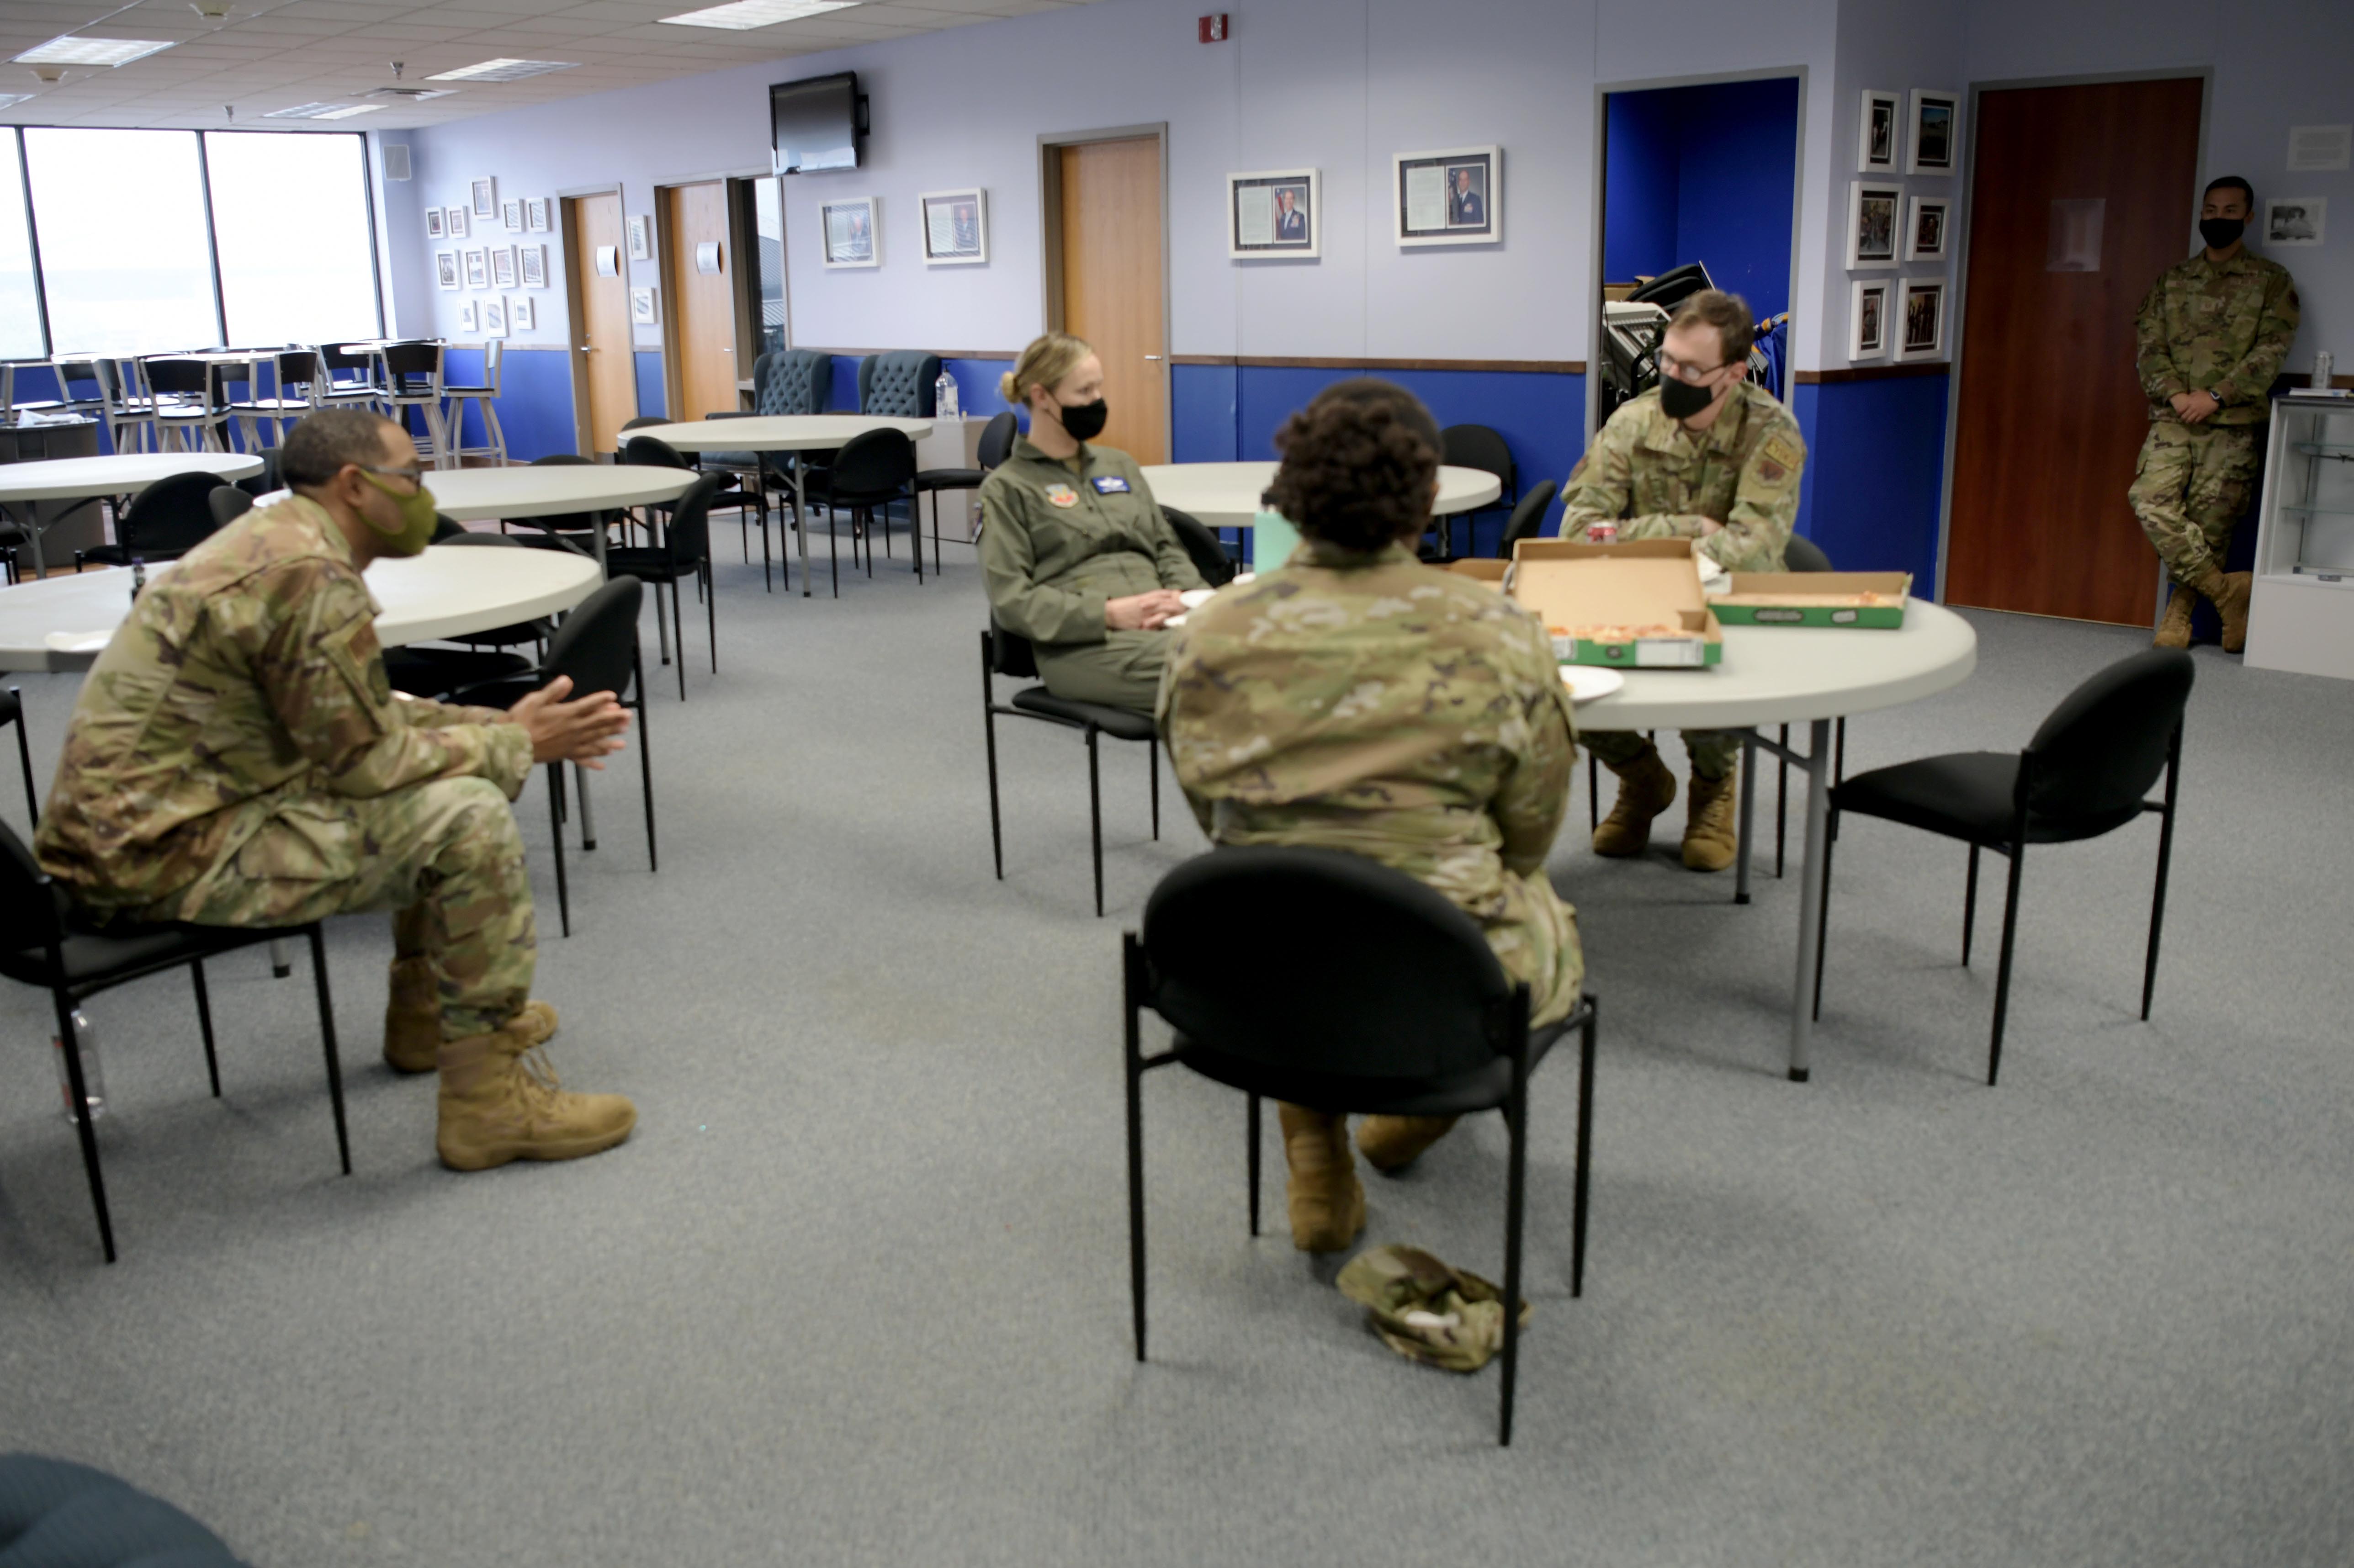 461st ACW: Keeping PULSE on Airmen, pursuing wingman culture >Robins Air Force Base >Article Display” loading=”lazy” style=”max-width: 330px;”></span> And we discovered that it is a function usually limited to extra premium fashions. Whereas most gaming chairs with built-in massagers have limited performance, this gaming recliner comes with a distant so you possibly can toggle between modes, intensity, and even set the massager on a timer. This is no small worth to pay, regardless that the chair itself is nicely worth it. And on consolation alone, we think it is nicely value the price. It is extremely durable as well. This gaming chair has a robust integrated body that’s made up of metallic, greatest quality PU leather-based in addition to high-density thick padding that makes this chair probably the most comfortable and is a good pick for critical avid gamers. The AndaSeat Kaiser three began as a end result of years of learning about what makes a superb gaming chair nice. Not only are you deciding what you’ll be sitting on for years to come, however you’re probably shaping the destiny of your bodily well being.</p>
<p> And it comes with loads of alluring options, together with a tender fabric cloth seat and velour cushions, giving the exterior a more plush really feel that prevents you from sticking to it when you’re sitting by way of long gaming periods. I discovered myself sitting forward a bit from my standard position, and it was barely extra comfortable. You will discover extra of her work in PCWorld, Macworld, TechHive, CNET, Gizmodo, Tom’s Guide, Pc Gamer, Men’s Health, Men’s Fitness, Shape, Cosmopolitan, and just about all over the place else. Players akin to Iceiceice and Xian (Street Fighter world champion) are local international superstars and a giant deal in Singapore as nicely – being able to work with key neighborhood figures to inspire younger budding avid gamers is a big reward in itself. Designed for avid gamers, Embody Gaming Chair is engineered to remove fatigue, improve posture, and allow gamers and esports professionals to sport higher. We additionally partnered with skilled players who mirror our values as well.</p>
<p> Logitech revealed in the present day their model new Logitech Embody gaming chair that they partnered with Herman Miller for, and while it’s a beauty and little doubt shall be comfy, at $1,500, that’s too much of money to drop on one thing you’re going to fart consistently on. It obviously started with Starcraft 2, however we watch fairly a little bit of Dota 2. We’re close pals with IceIceIce and hence we end up watching a lot of his video games. We watch a whole lot of streams of their tournaments and events in our free time, so seeing our chairs on their stream now’s pretty wonderful. Gaming chairs improve the consolation considerably and allow you to increase the duration of your gaming classes. Secretlab has been creating gaming chairs since 2015 and in this review we take a look at their Omega mannequin. If you’re in need of wonderful again help, look no further than the Mavix M9.</p>
</div></div>



<div class=